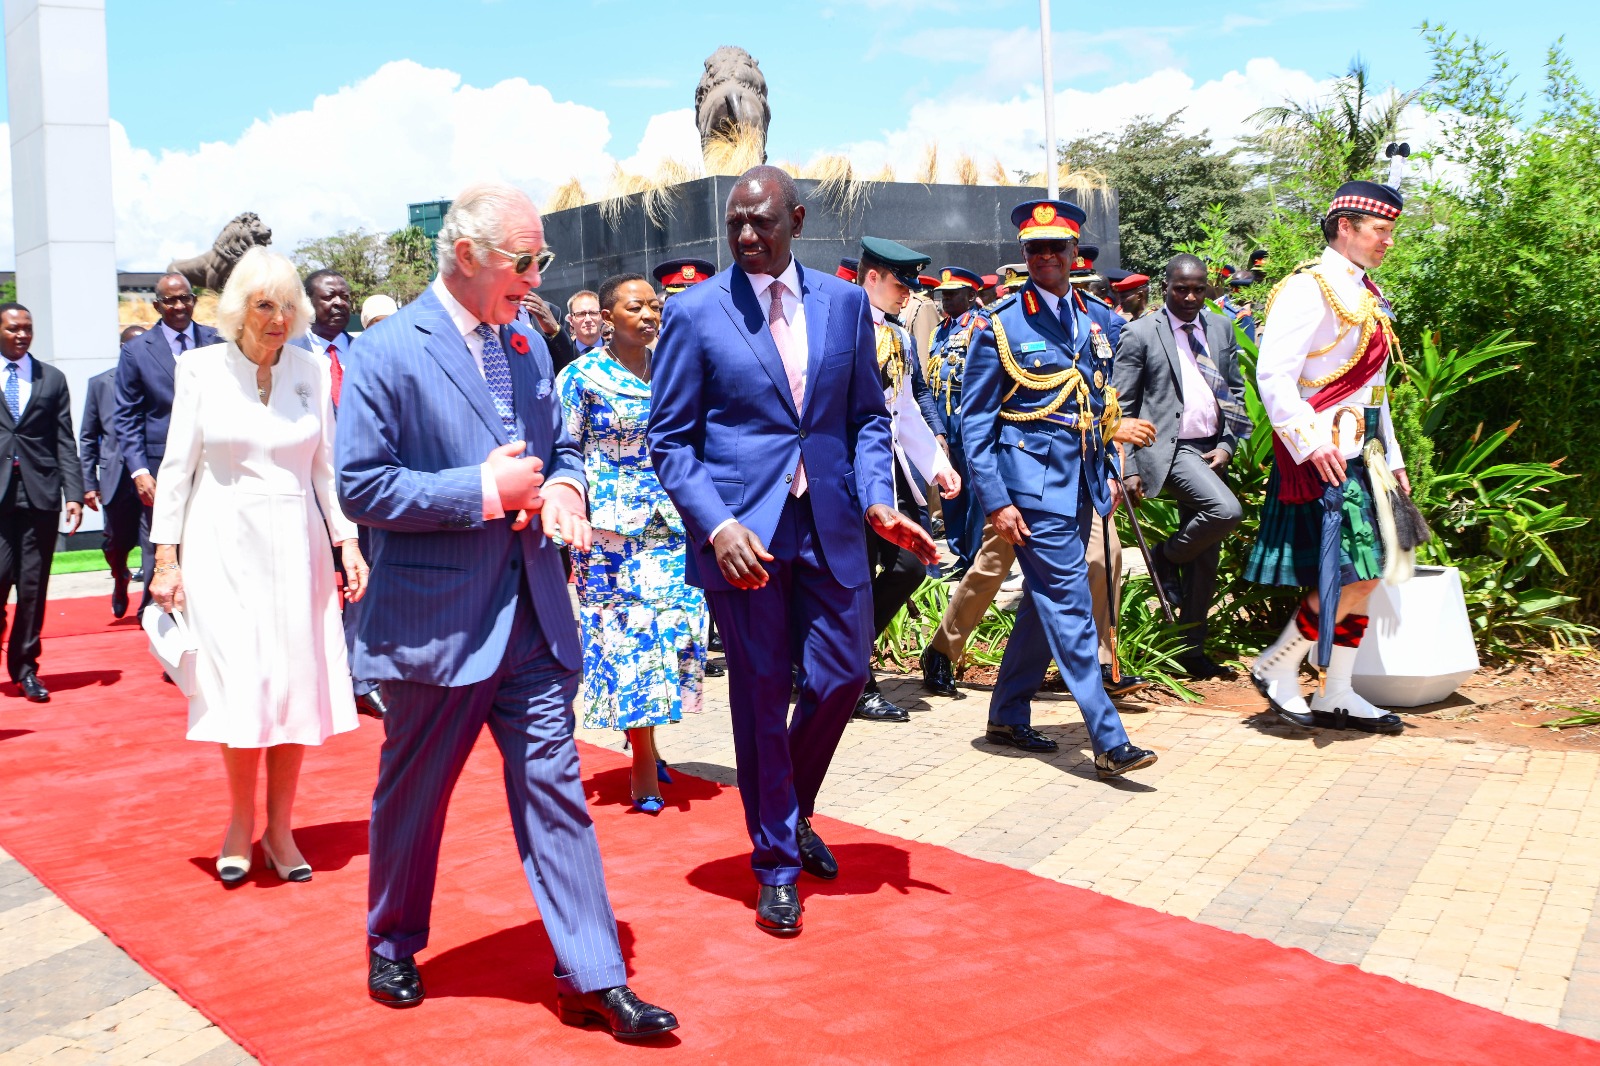 King Charles III’s Historic Visit to Kenya Strengthens Ties with the UK